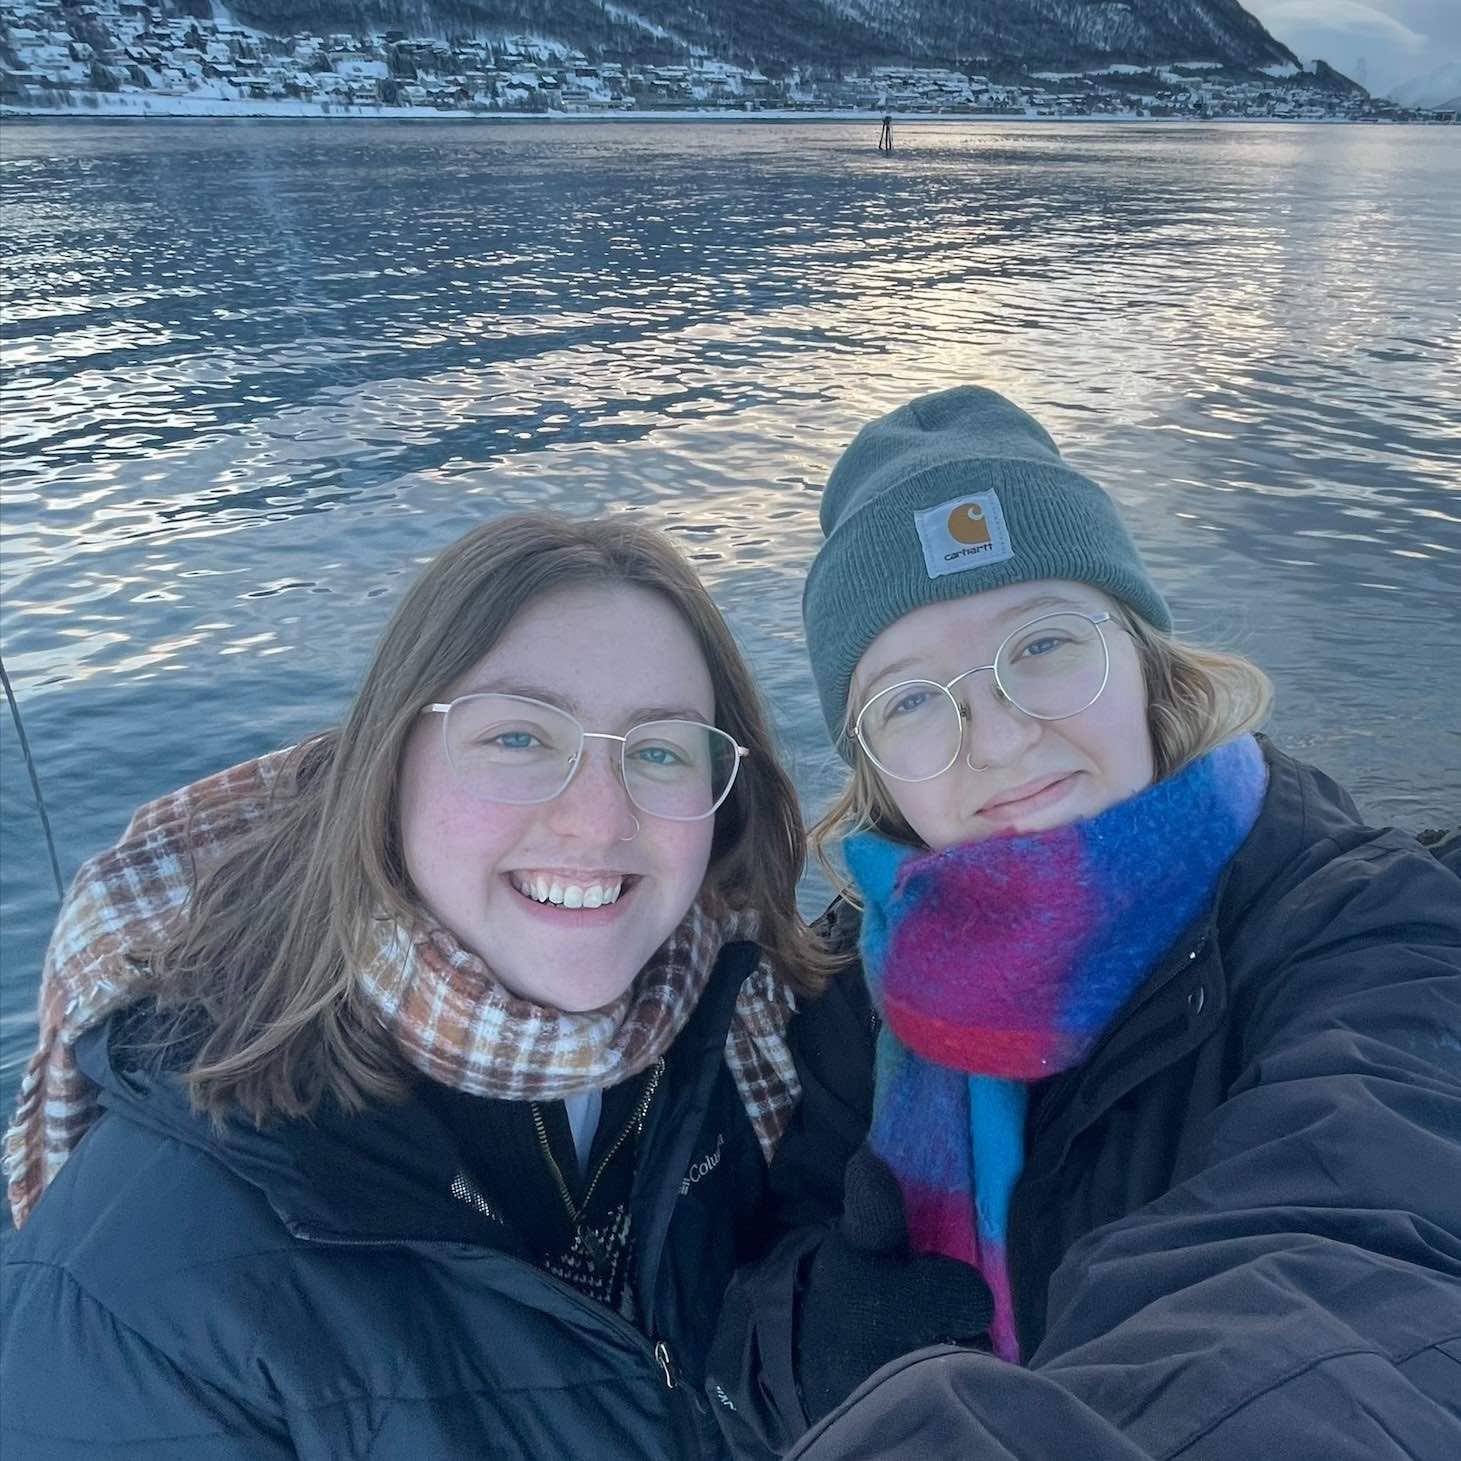 Kennedy Dechant and Penny Nichol in front of a snowy mountain